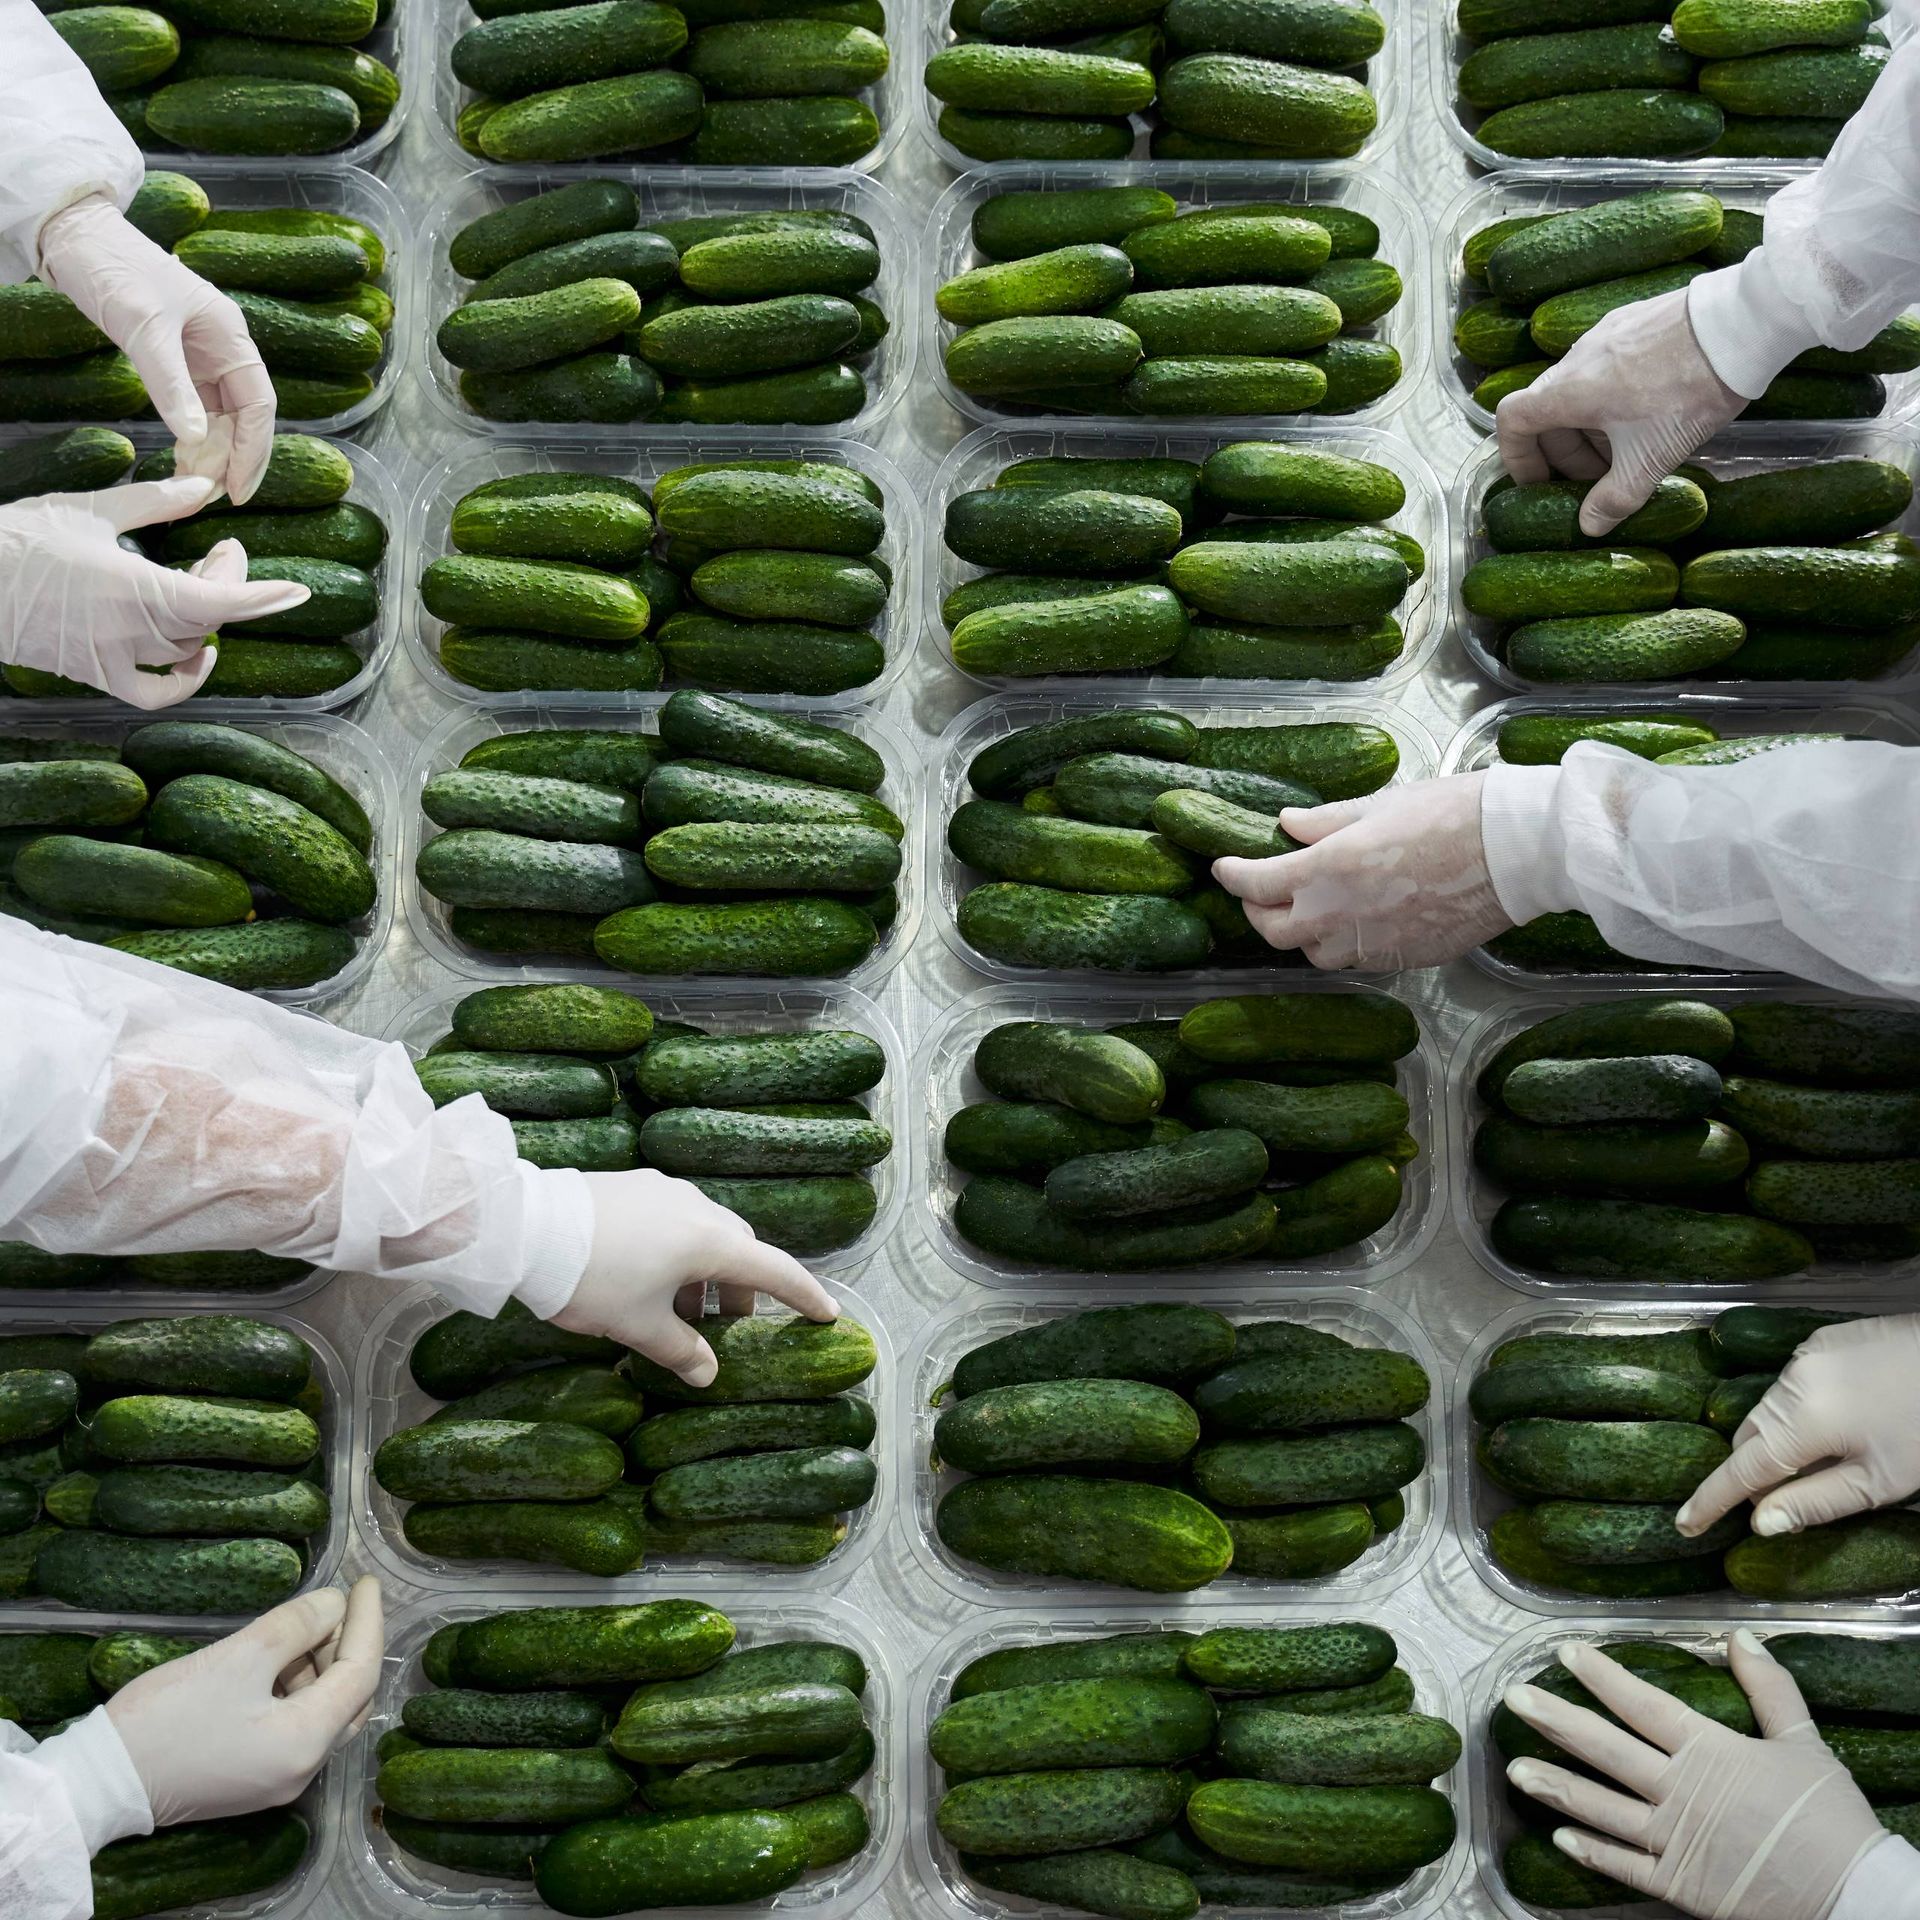 Image of a packing house preparing cucumbers for transport